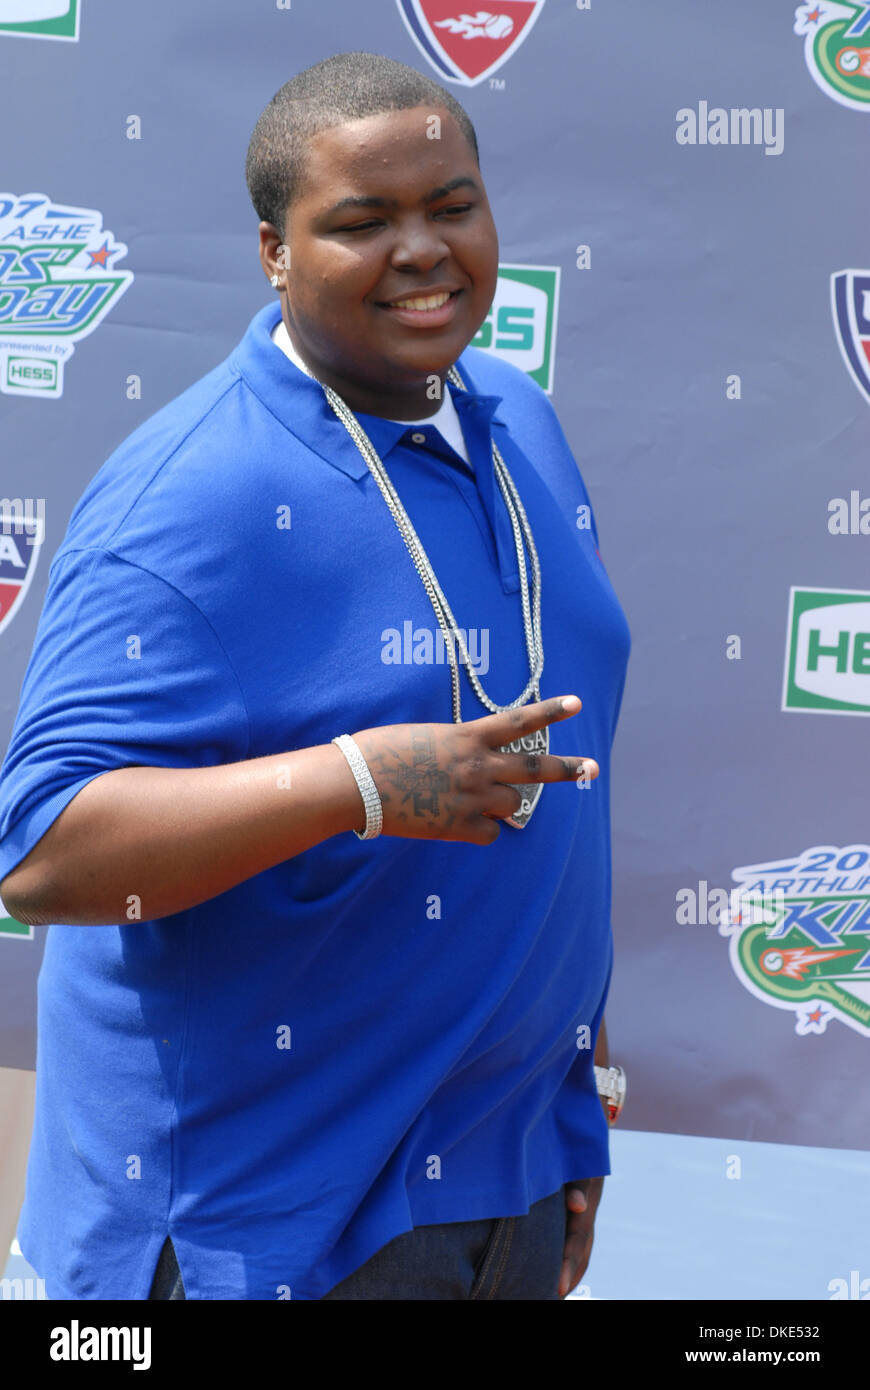 Aug 25, 2007 - New York, NY, USA - Singer SEAN KINGSTON at the 2007 Arthur  Ashe Kids Day at the US Open in New York City. (Credit Image: © Jeffrey  Geller/ZUMA Press Stock Photo - Alamy